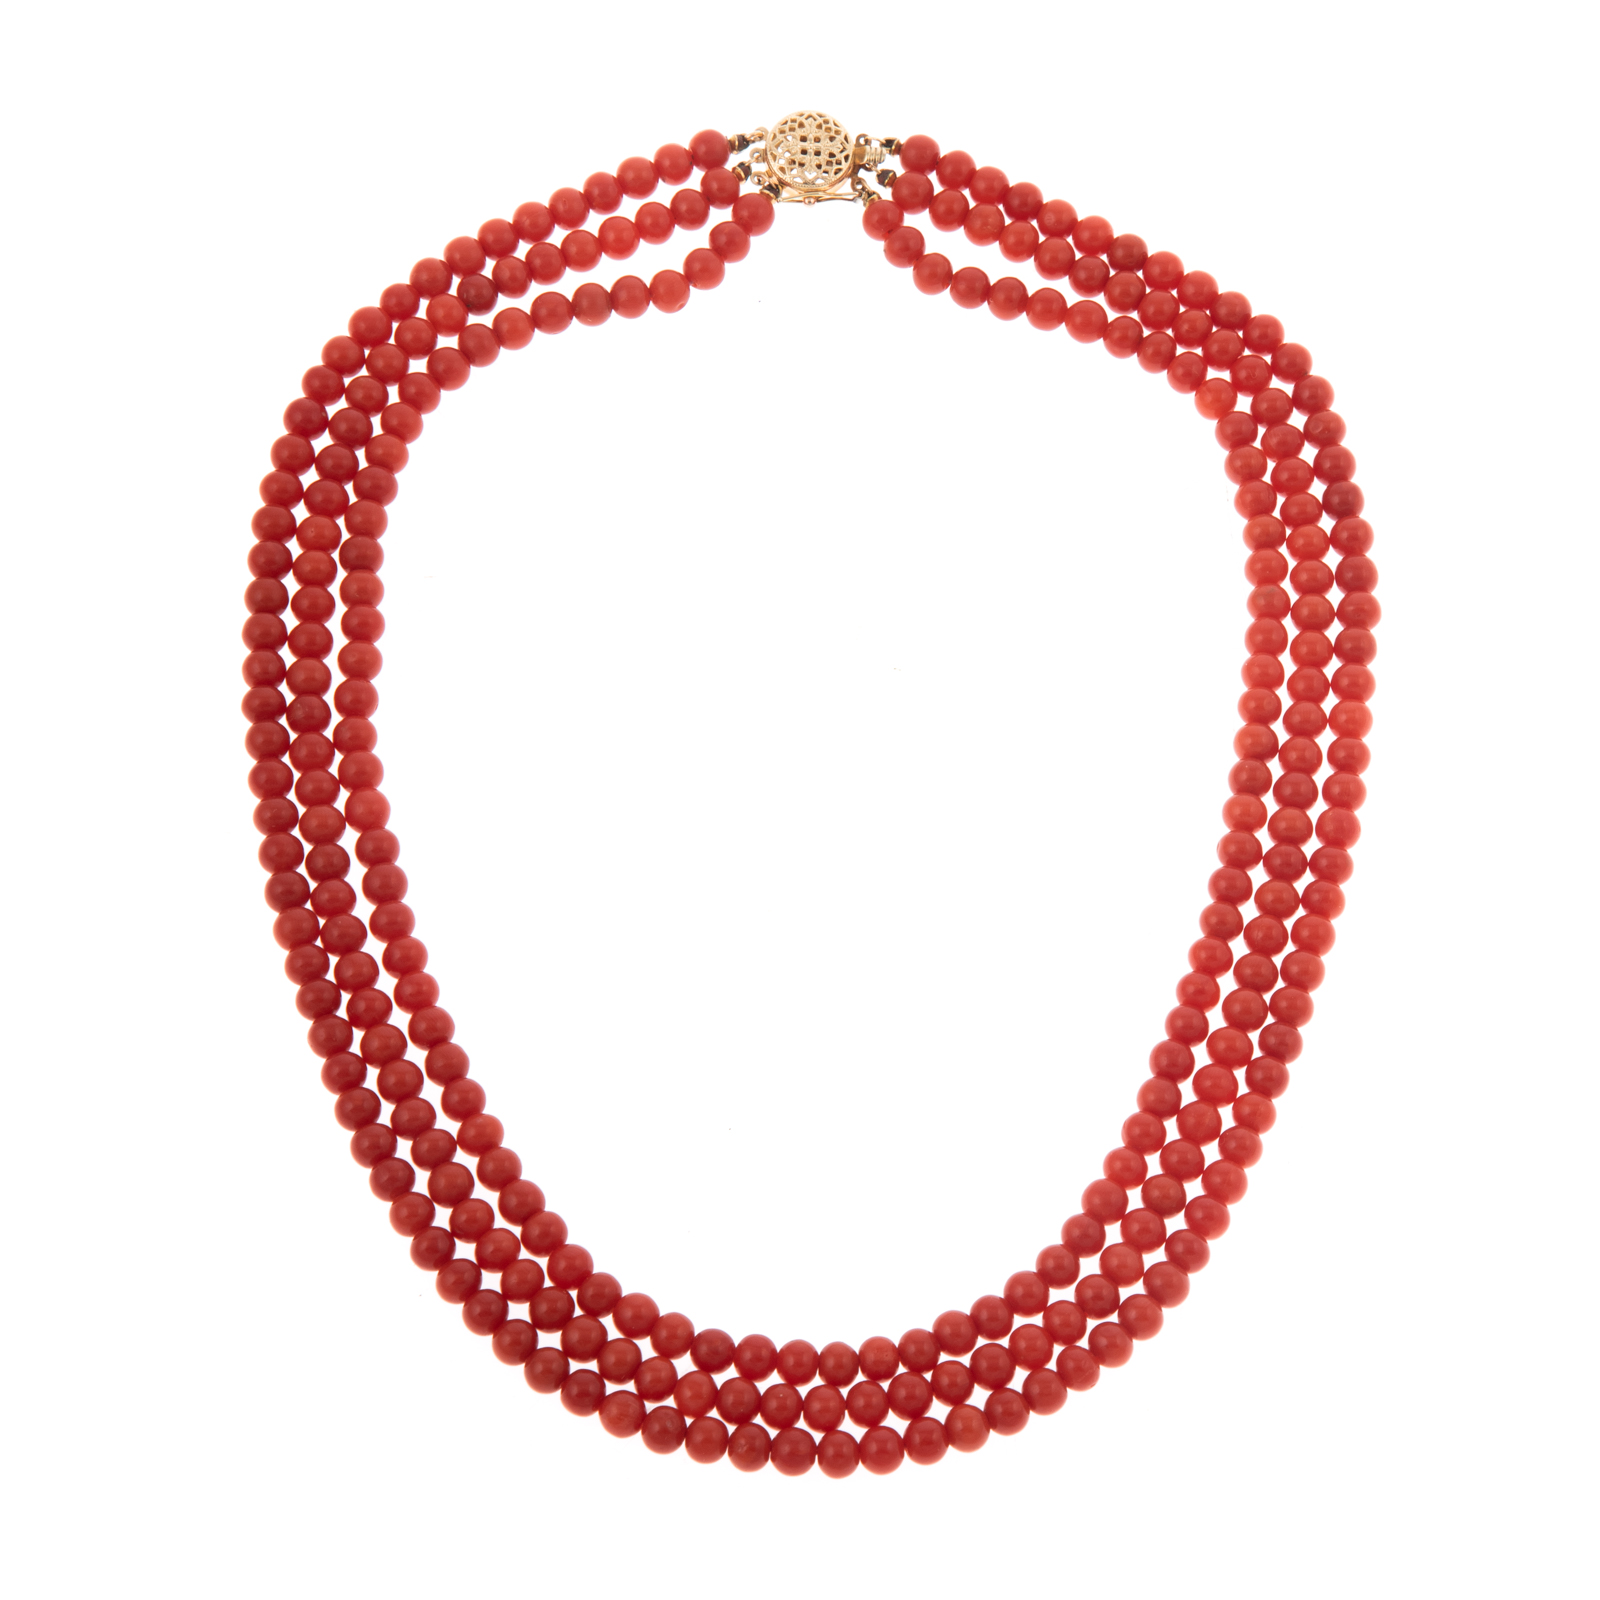 A TRIPLE STRAND OF CORAL BEADS 288cfc